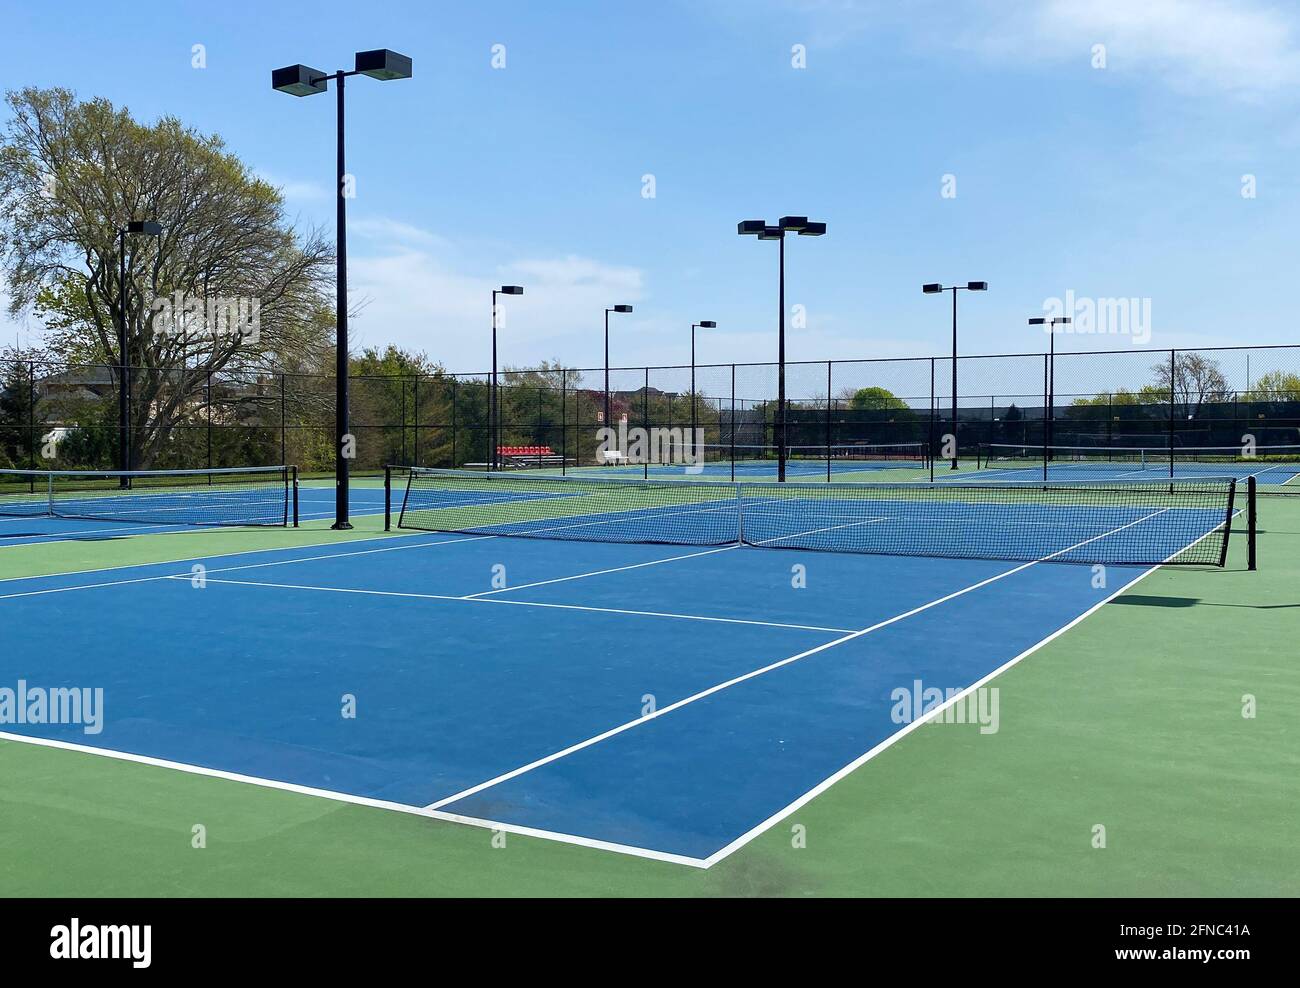 An empty tennis court with a blue and green surface and lights fenced in at a local school. Stock Photo